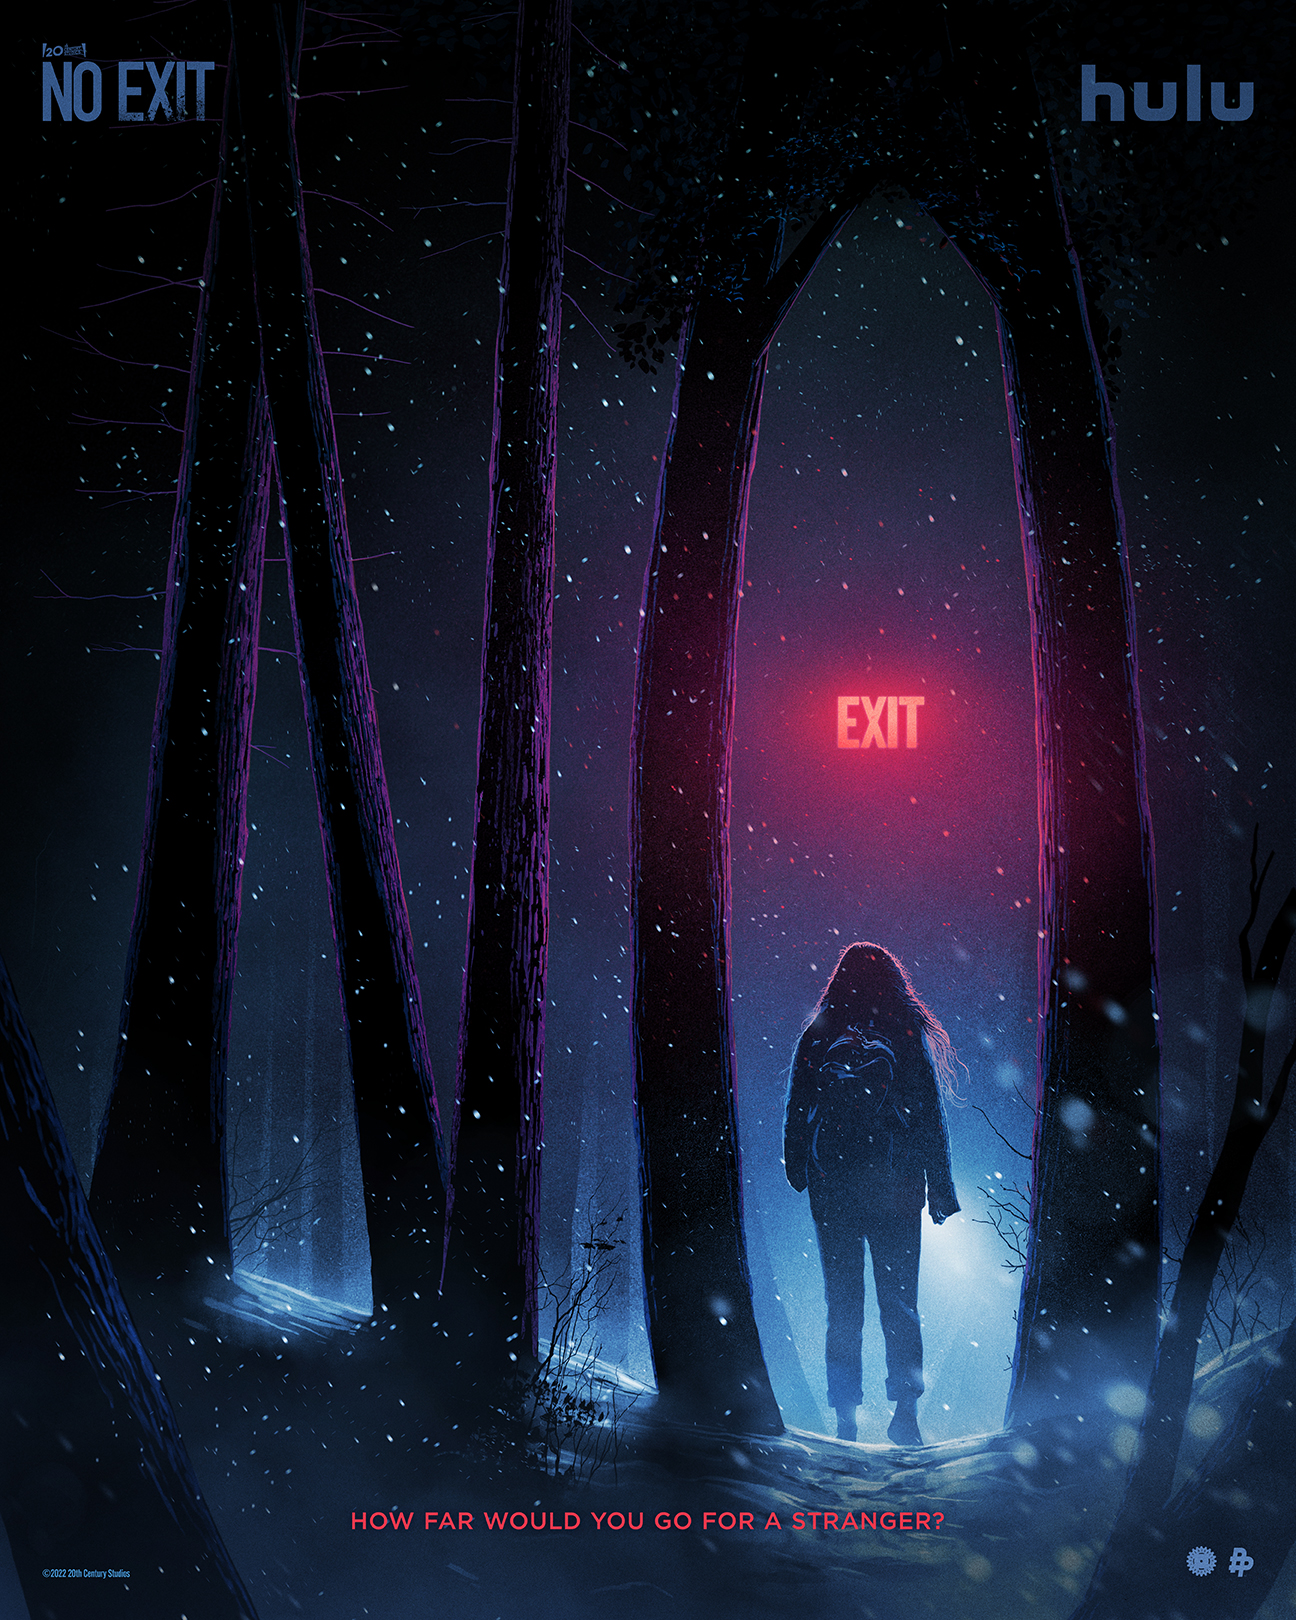 Featured image for “Marko Manev”